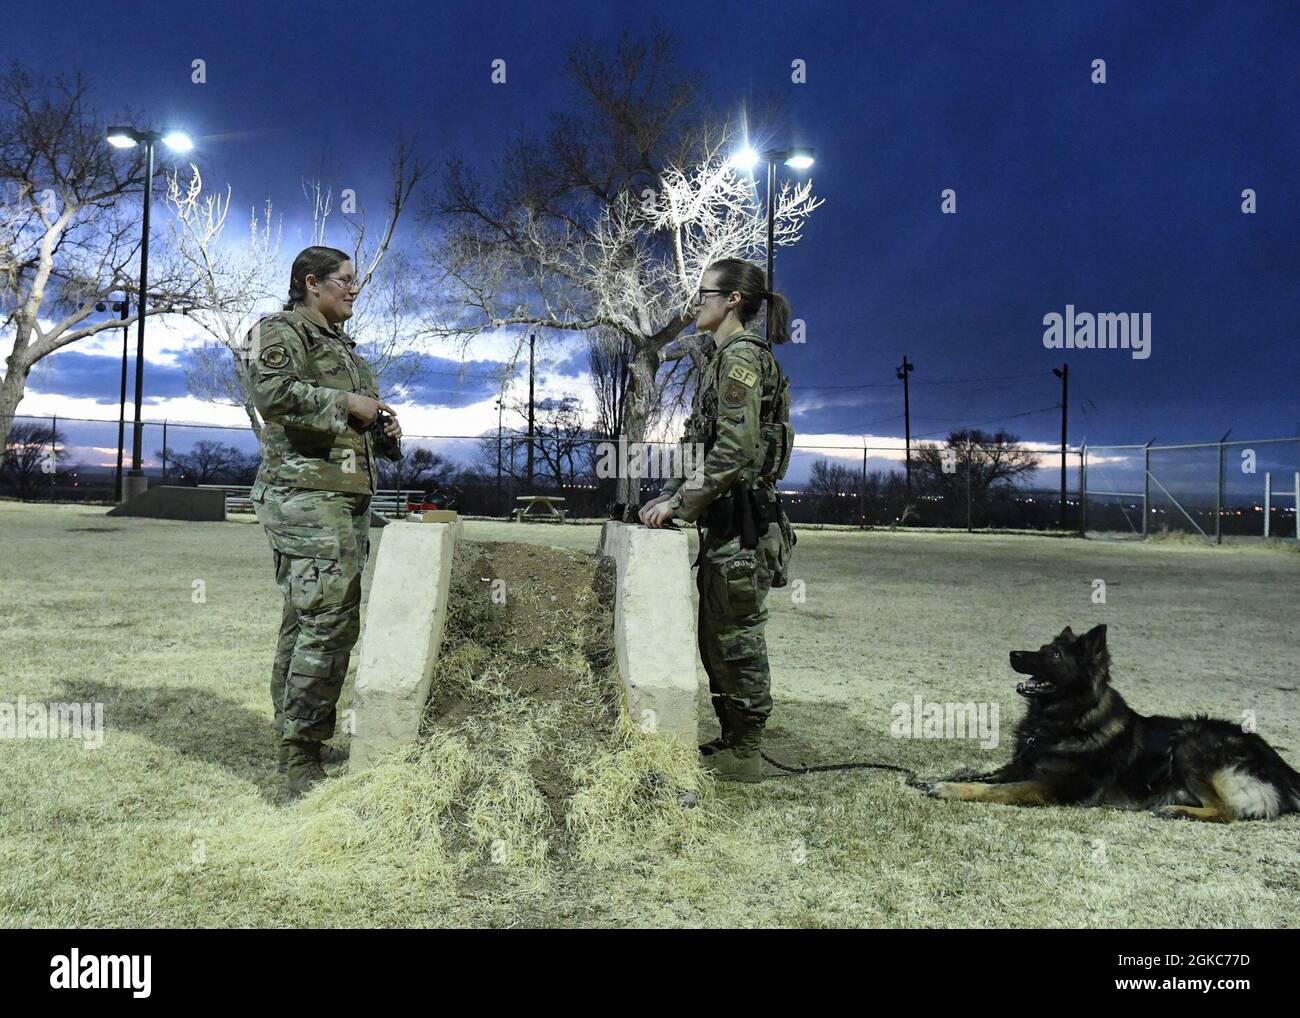 U.S. Air Force Staff Sgt. Adrienne G. Dunham, left, and Staff Sgt. Tara C. Cummins, right, both 377th Security Forces Squadron military working dog (MWD) handlers, prepare to conduct training with MWD Hugo on Kirtland Air Force Base, New Mexico, March 9, 2021. Cummins, MWD Hugo’s handler, trains Hugo each shift to ensure he is comfortable around gunfire and can complete any mission. Stock Photo